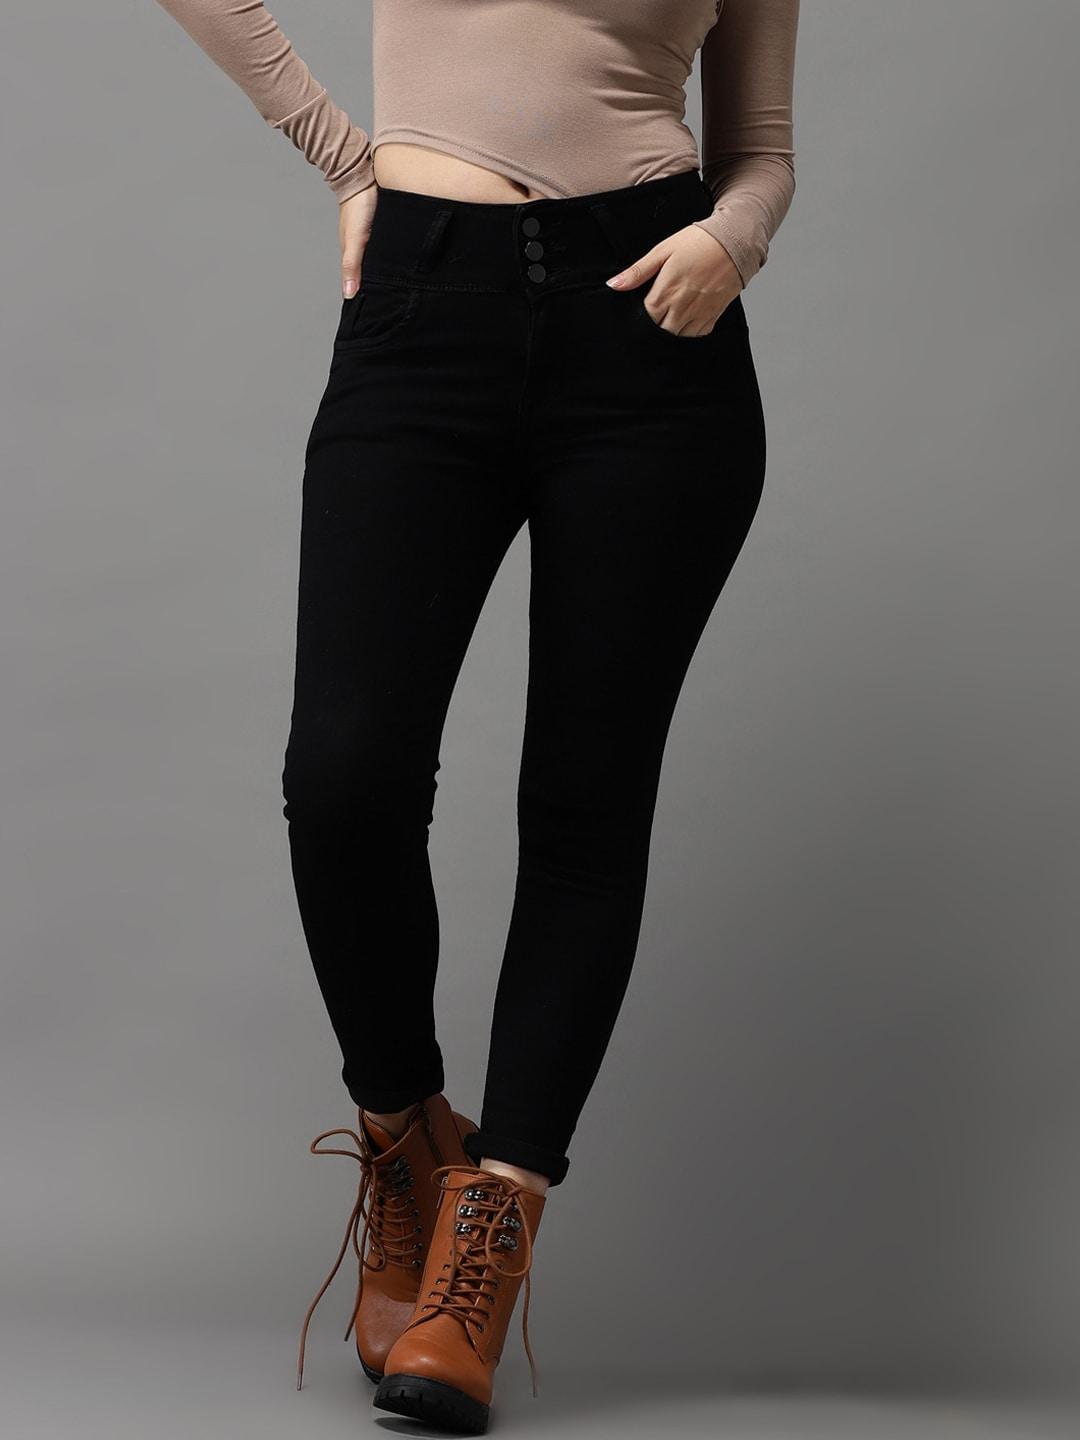 SHOWOFF Women Black Jean Skinny Fit High-Rise Stretchable Jeans